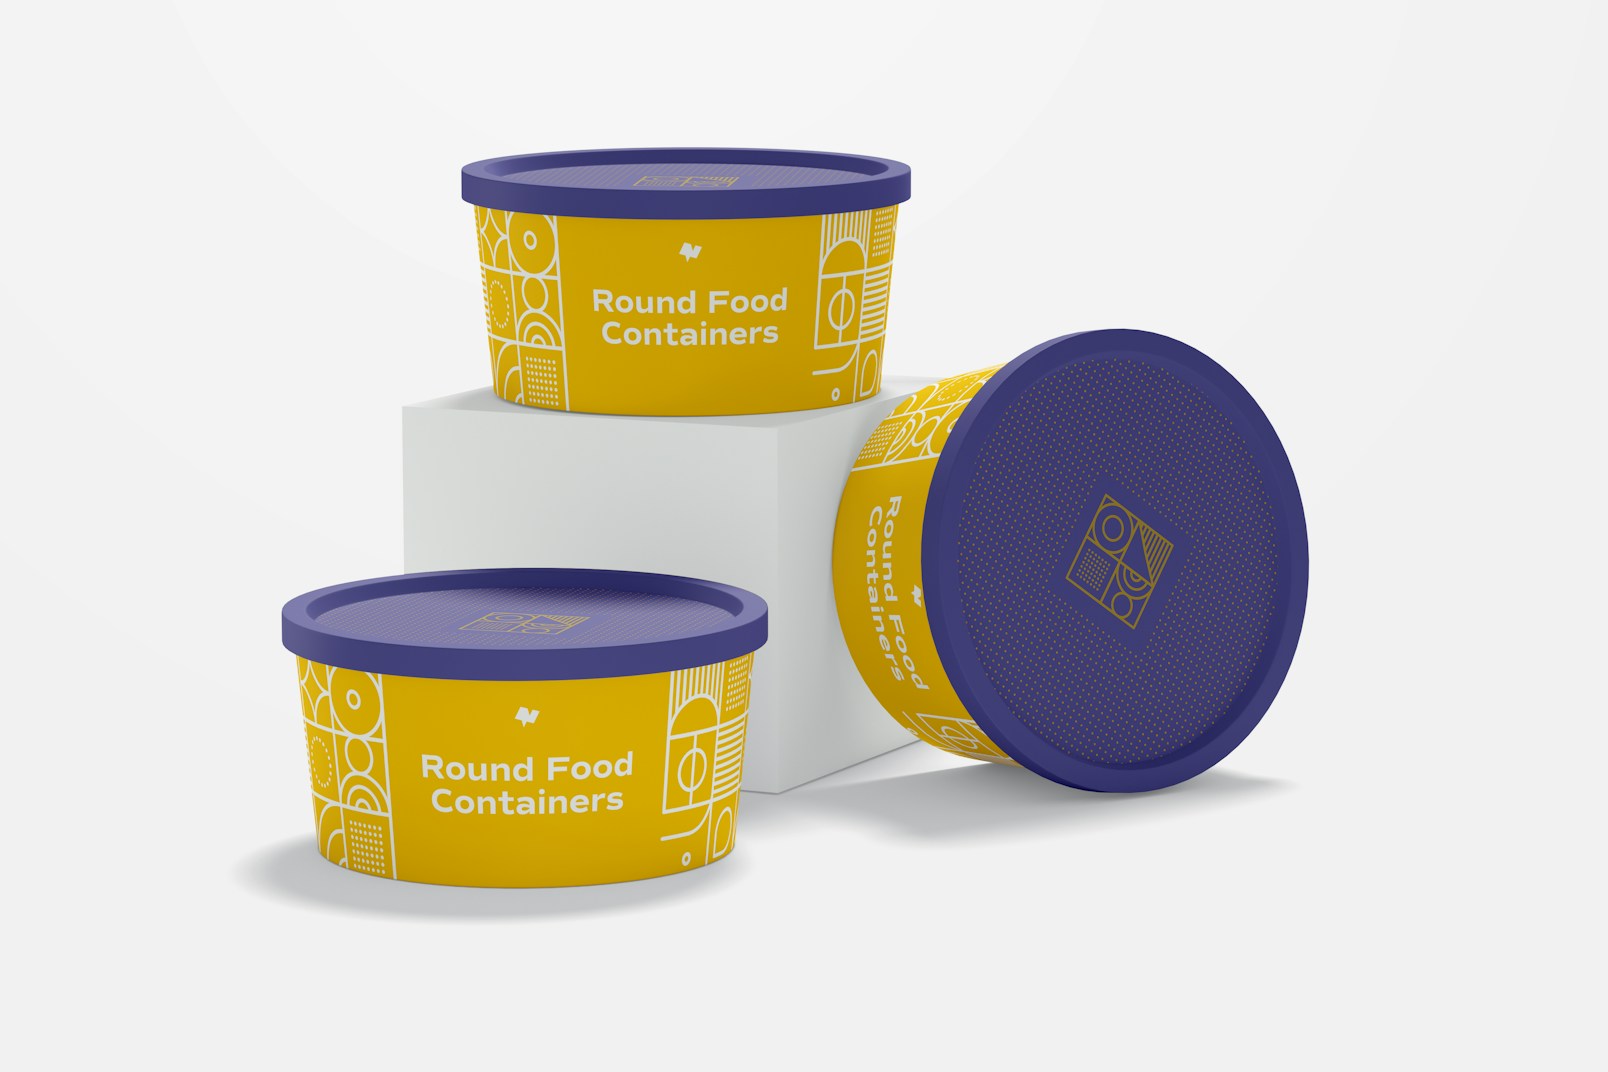 Round Plastic Food Delivery Container Set Mockup